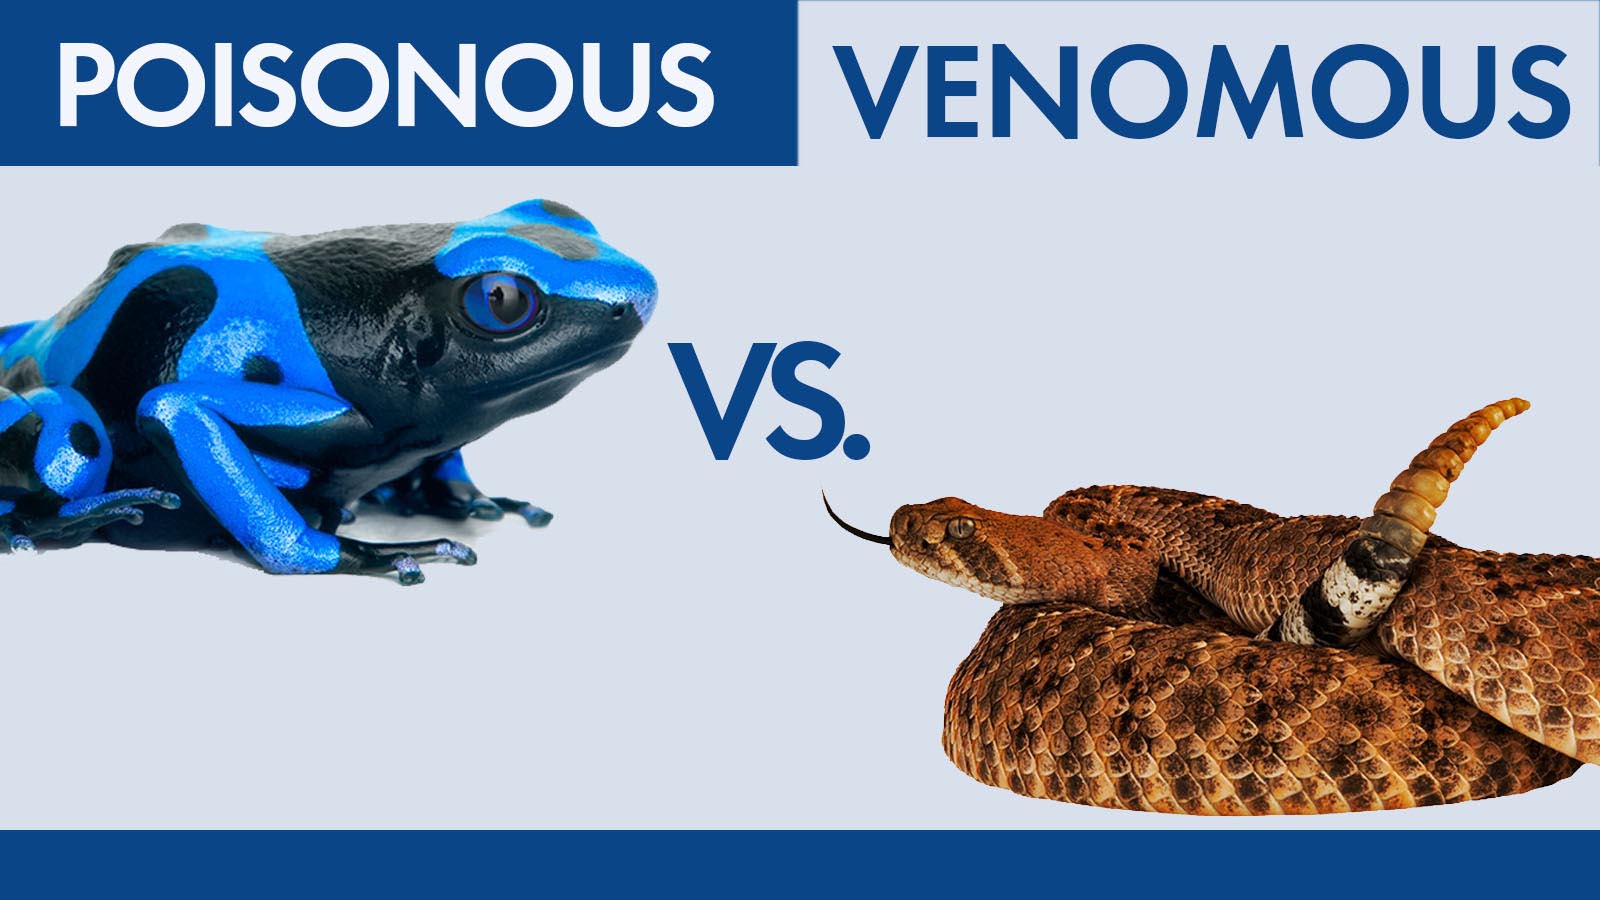 What is the difference between poisonous and venomous?